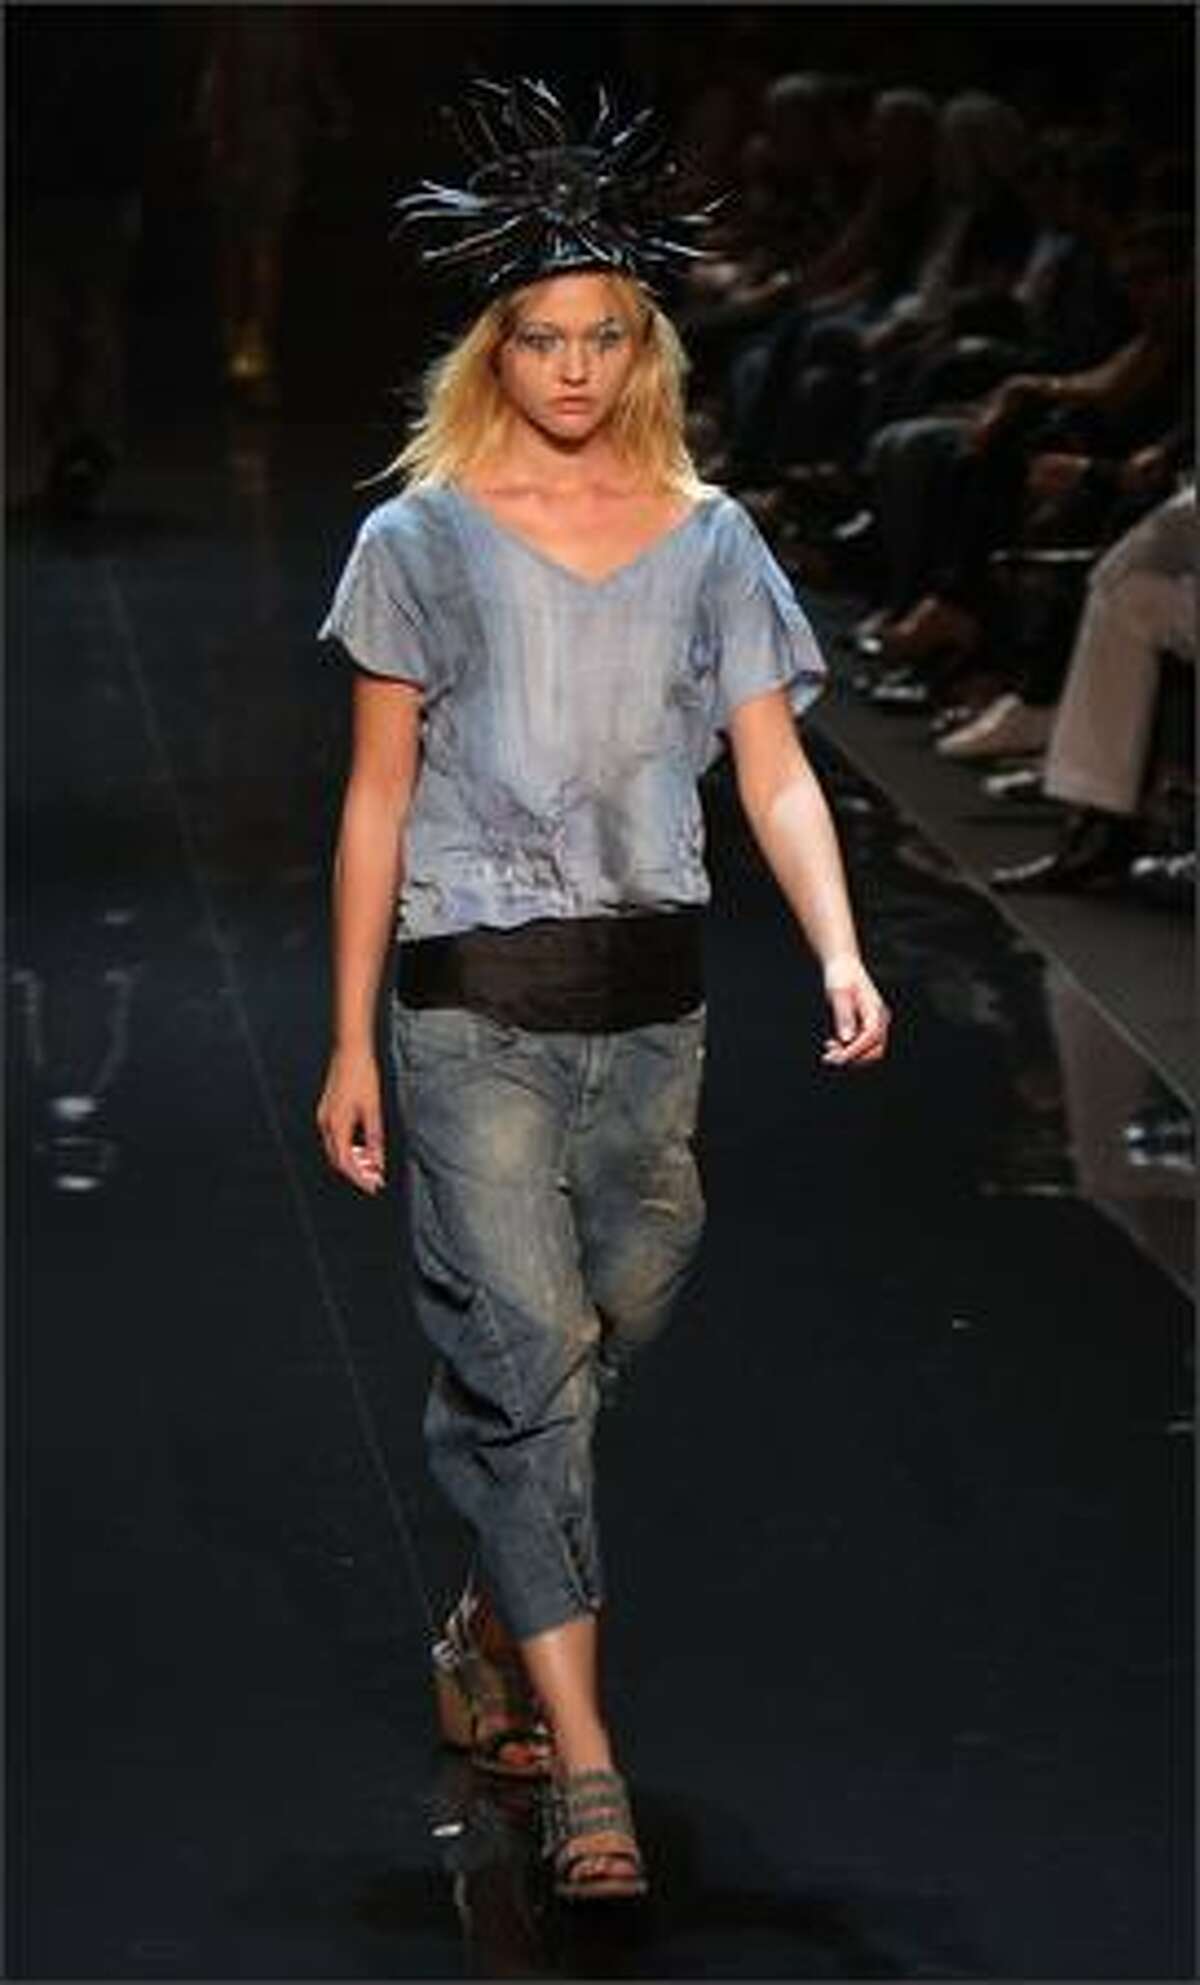 A model walks the runway at the Diesel Spring 2009 fashion show during Mercedes-Benz Fashion Week in New York City.